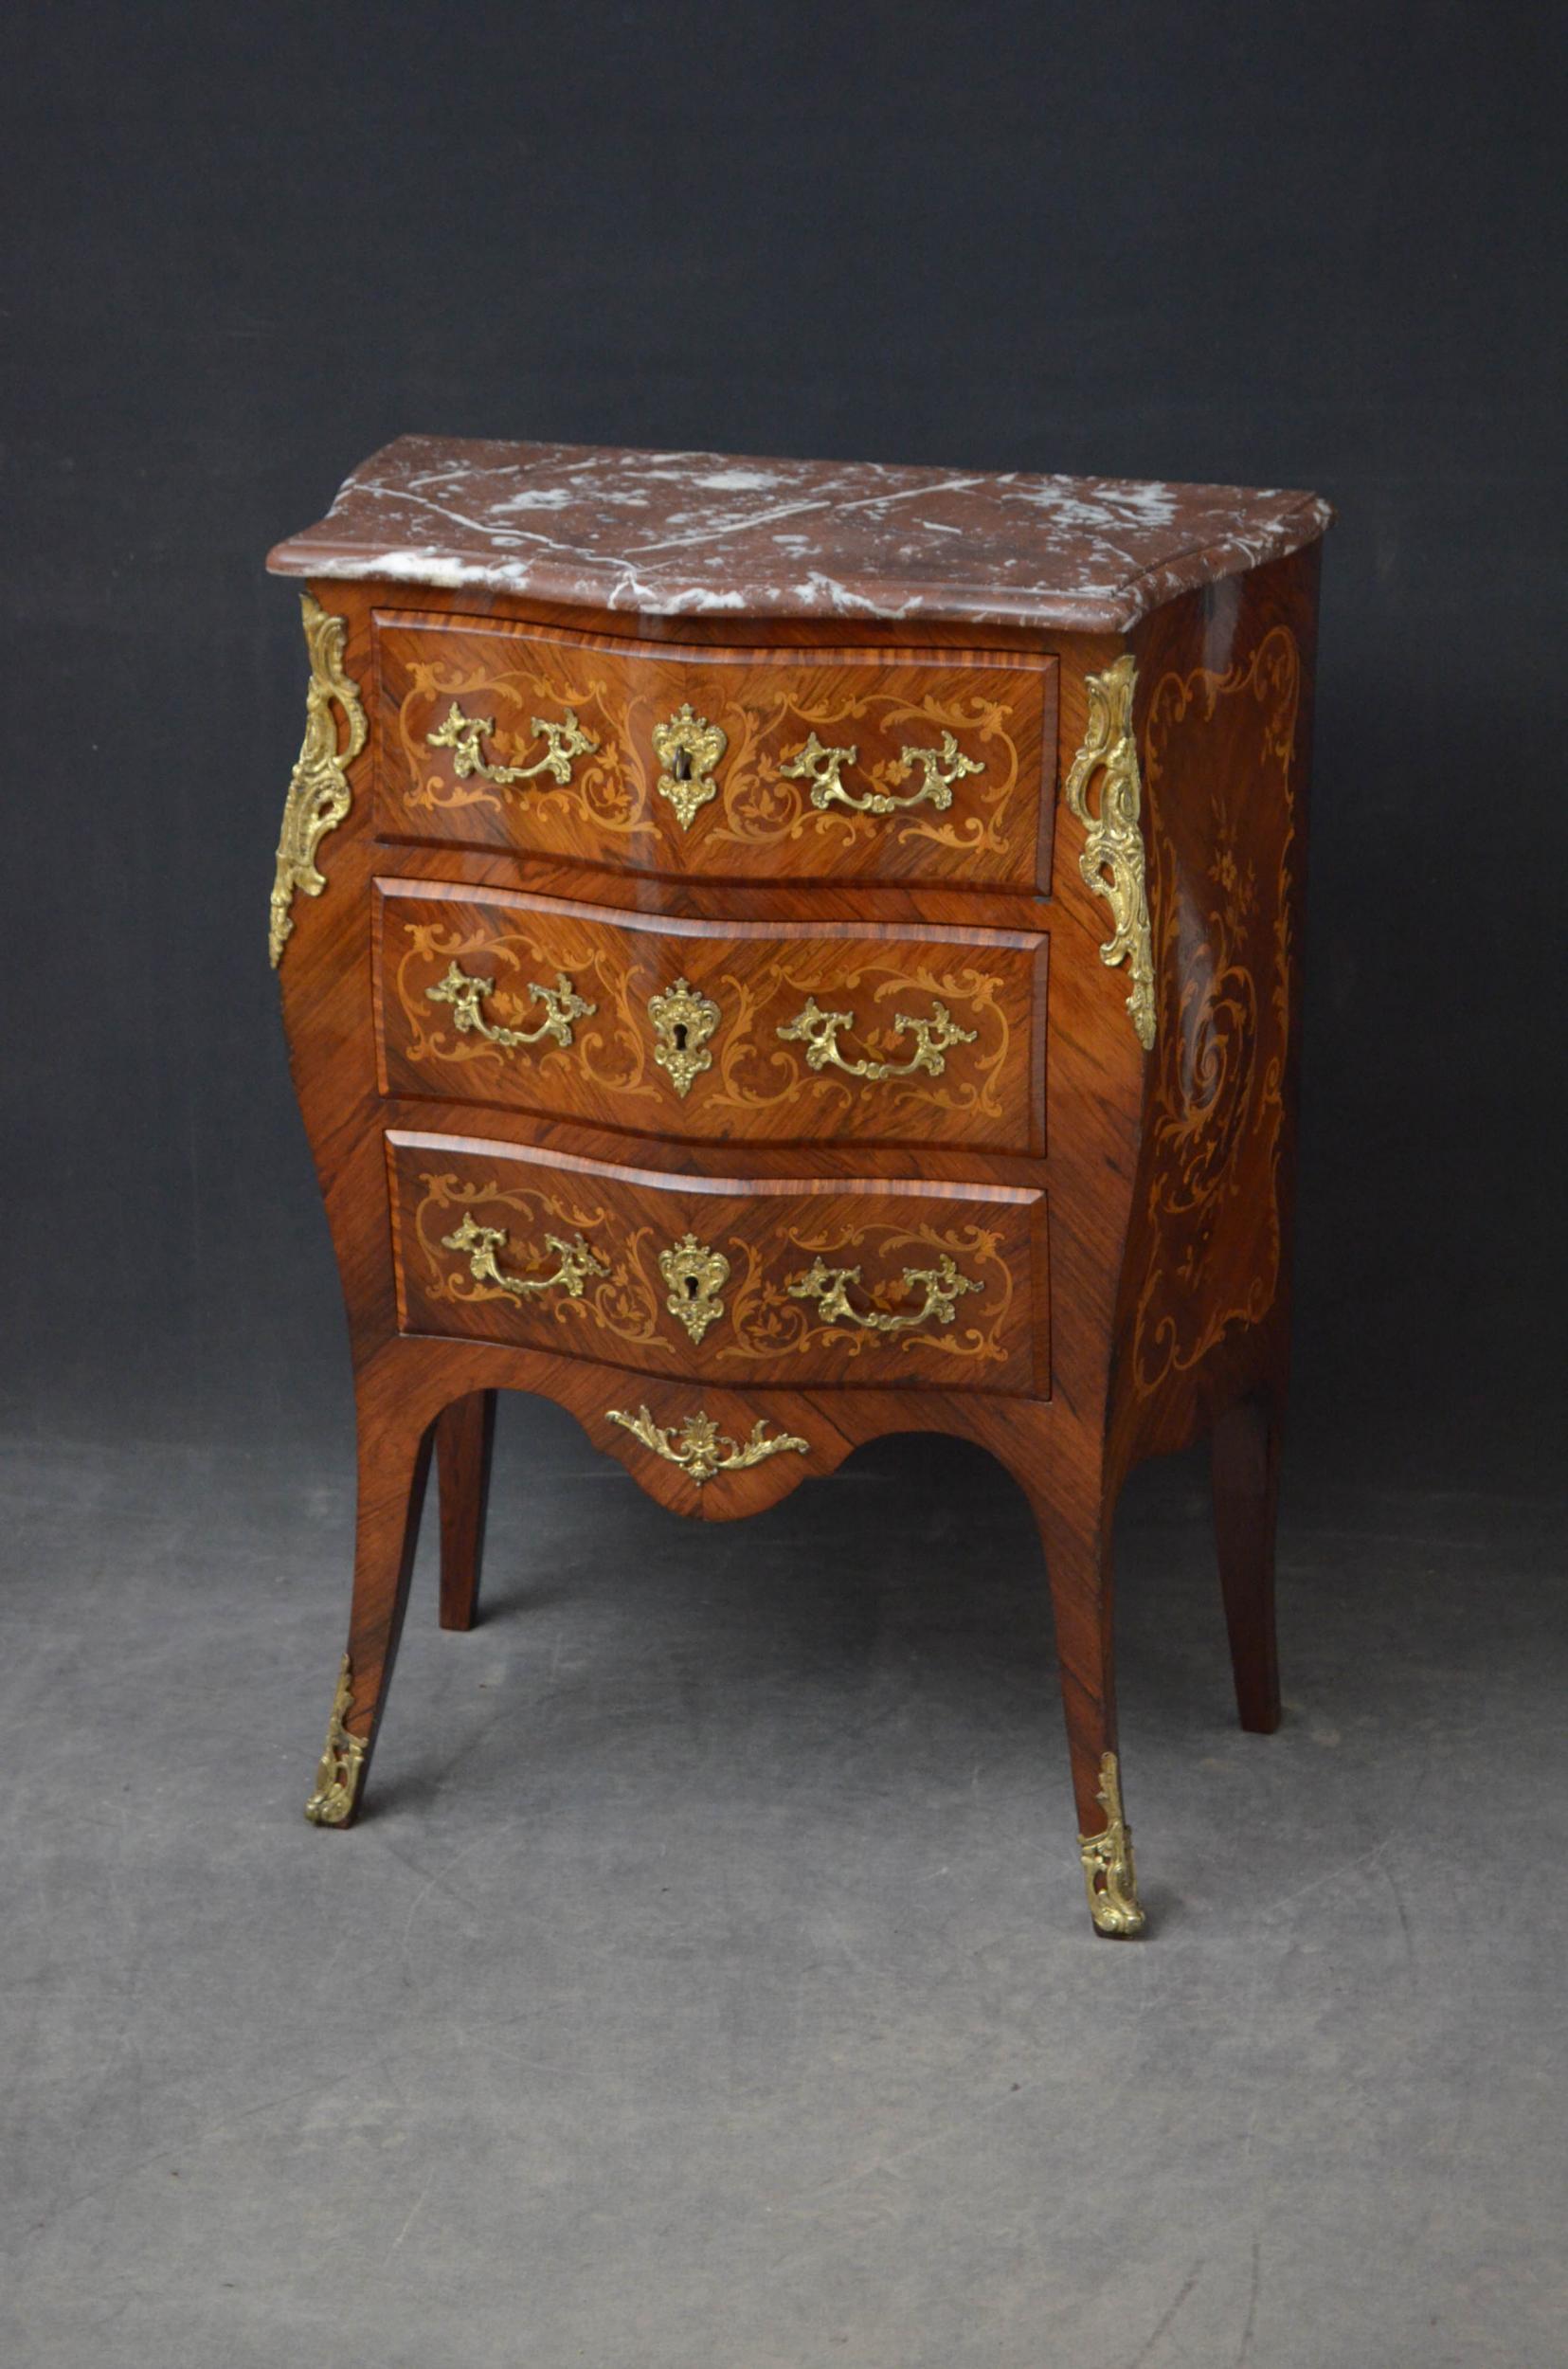 Sn5099, very attractive bombe commode in kingwood, having original veined marble top over three oak lined drawers with handmade dovetails, all fitted with original working locks and a key and decorated with satinwood floral scrolls on rosewood